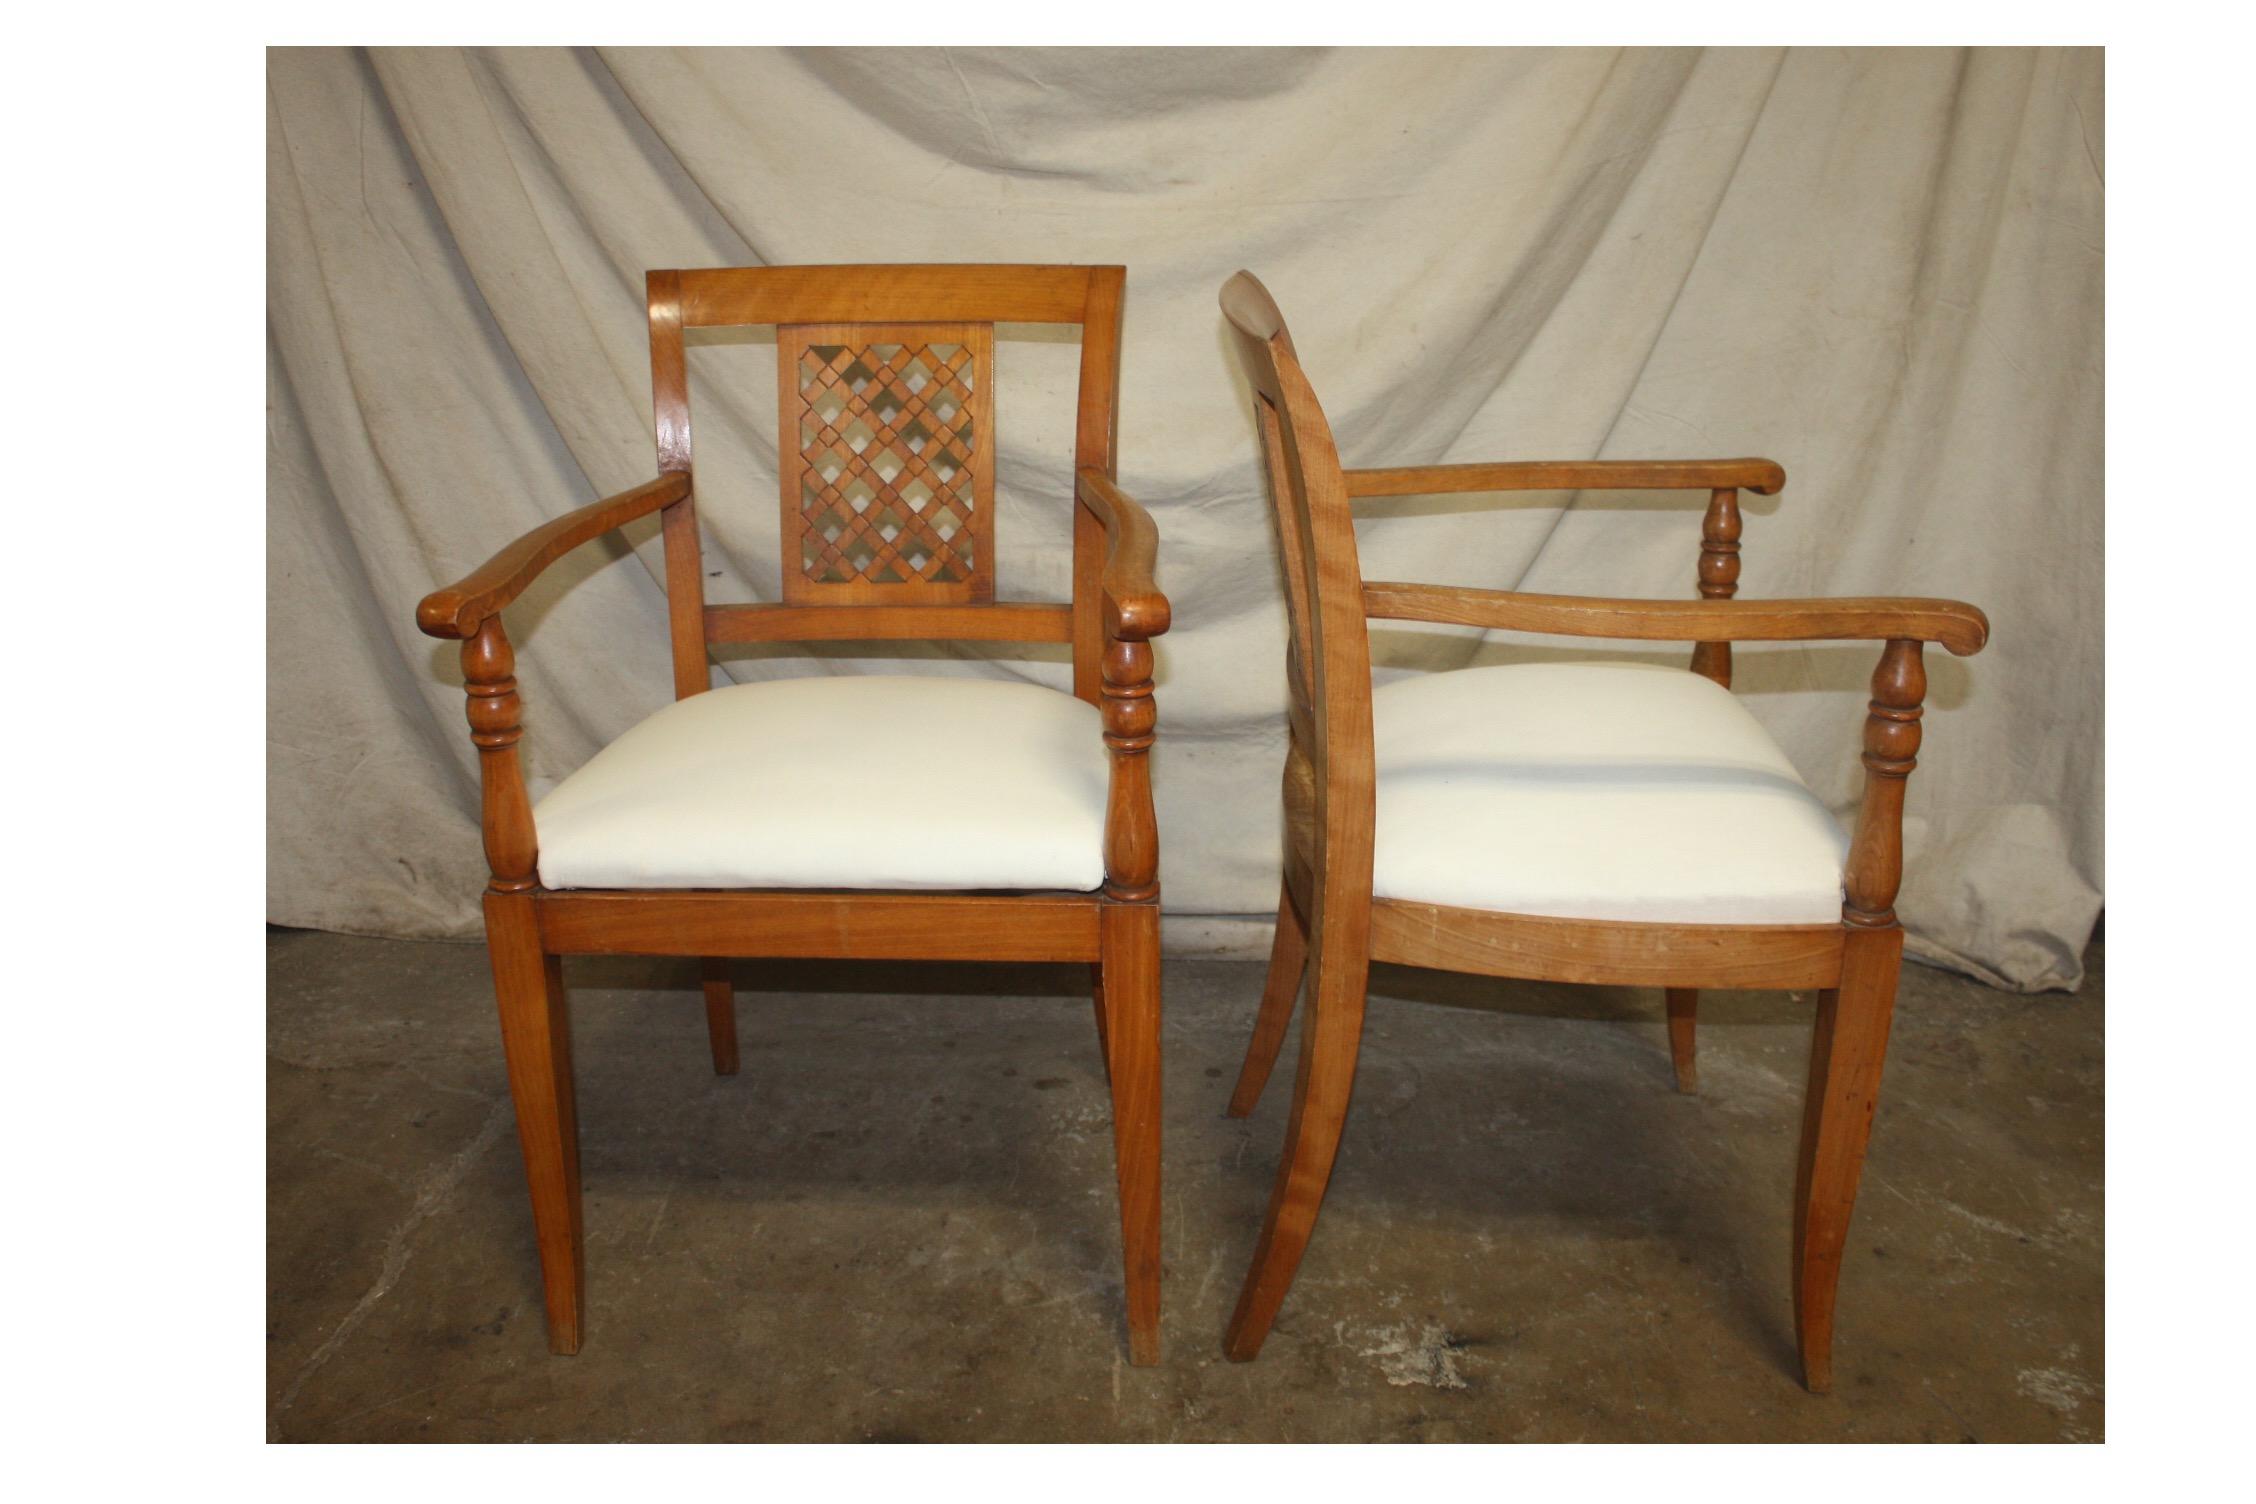 French Mid-20th Century Directoire Style Armchairs In Good Condition For Sale In Stockbridge, GA